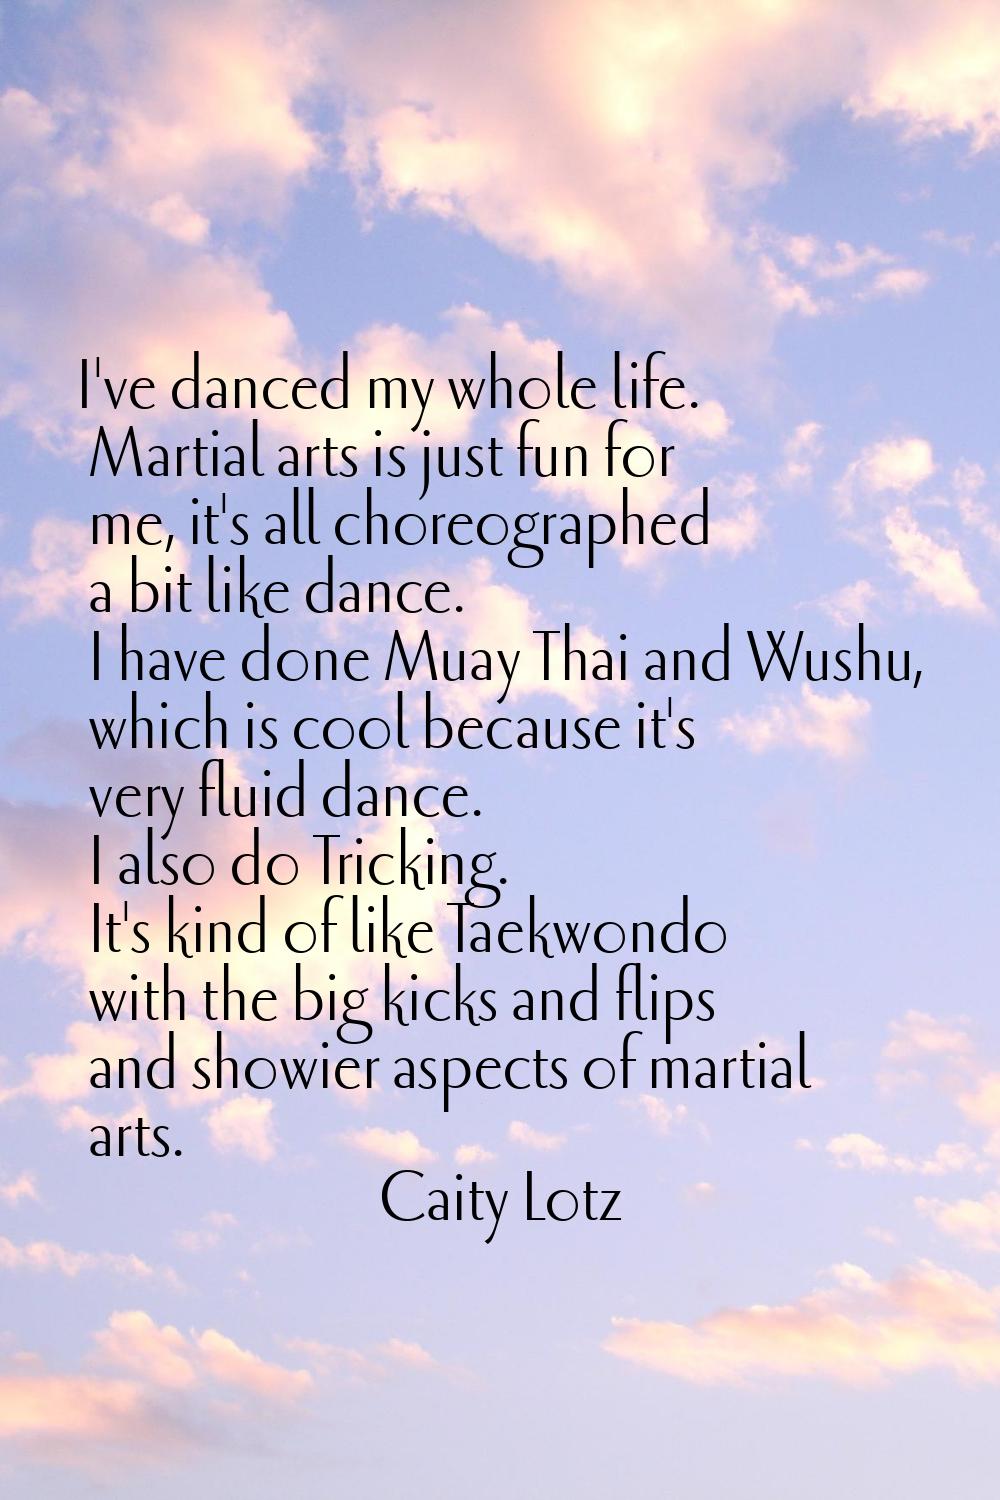 I've danced my whole life. Martial arts is just fun for me, it's all choreographed a bit like dance